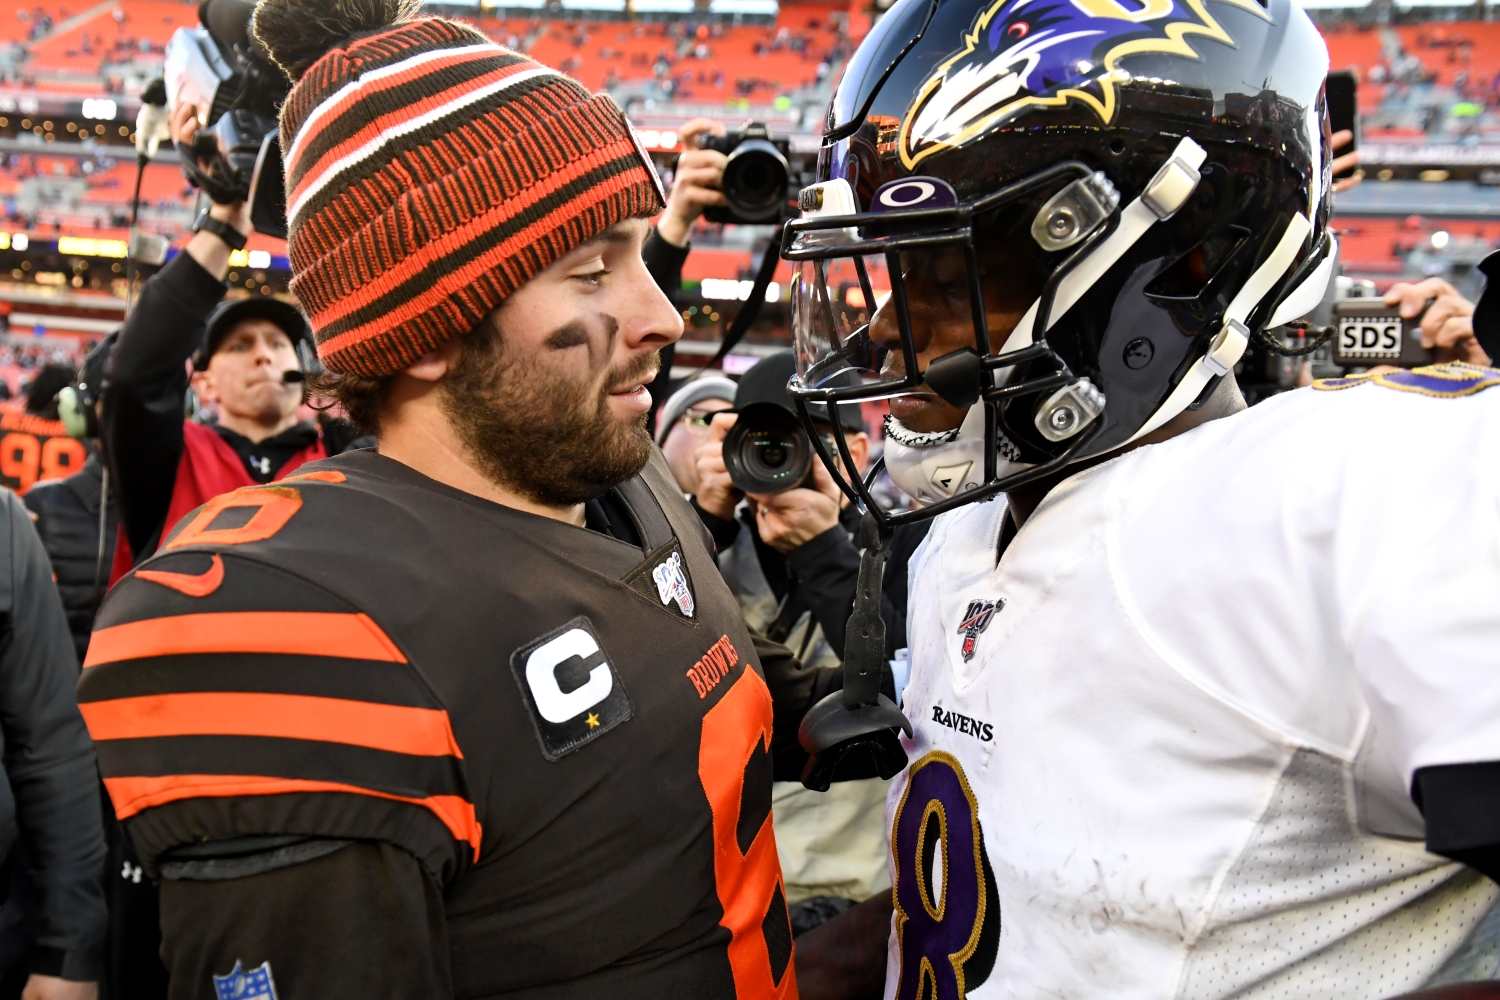 Lamar Jackson Can Force the Ravens to Hand Him a Blank Check for Christmas by Exposing Baker Mayfield and the Browns as Frauds in Upcoming Series Between AFC North Rivals